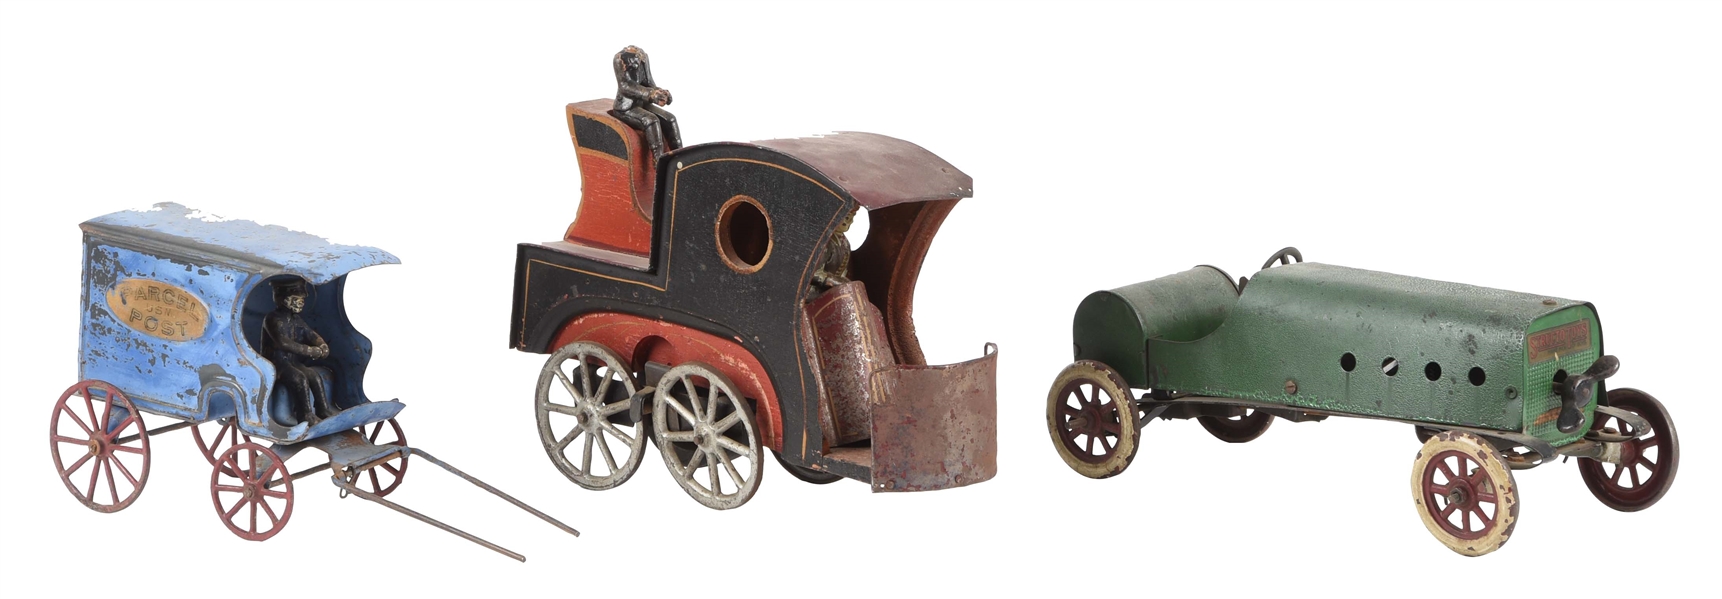 LOT OF 3: EARLY AMERICA TRANSPORTATION TOYS.